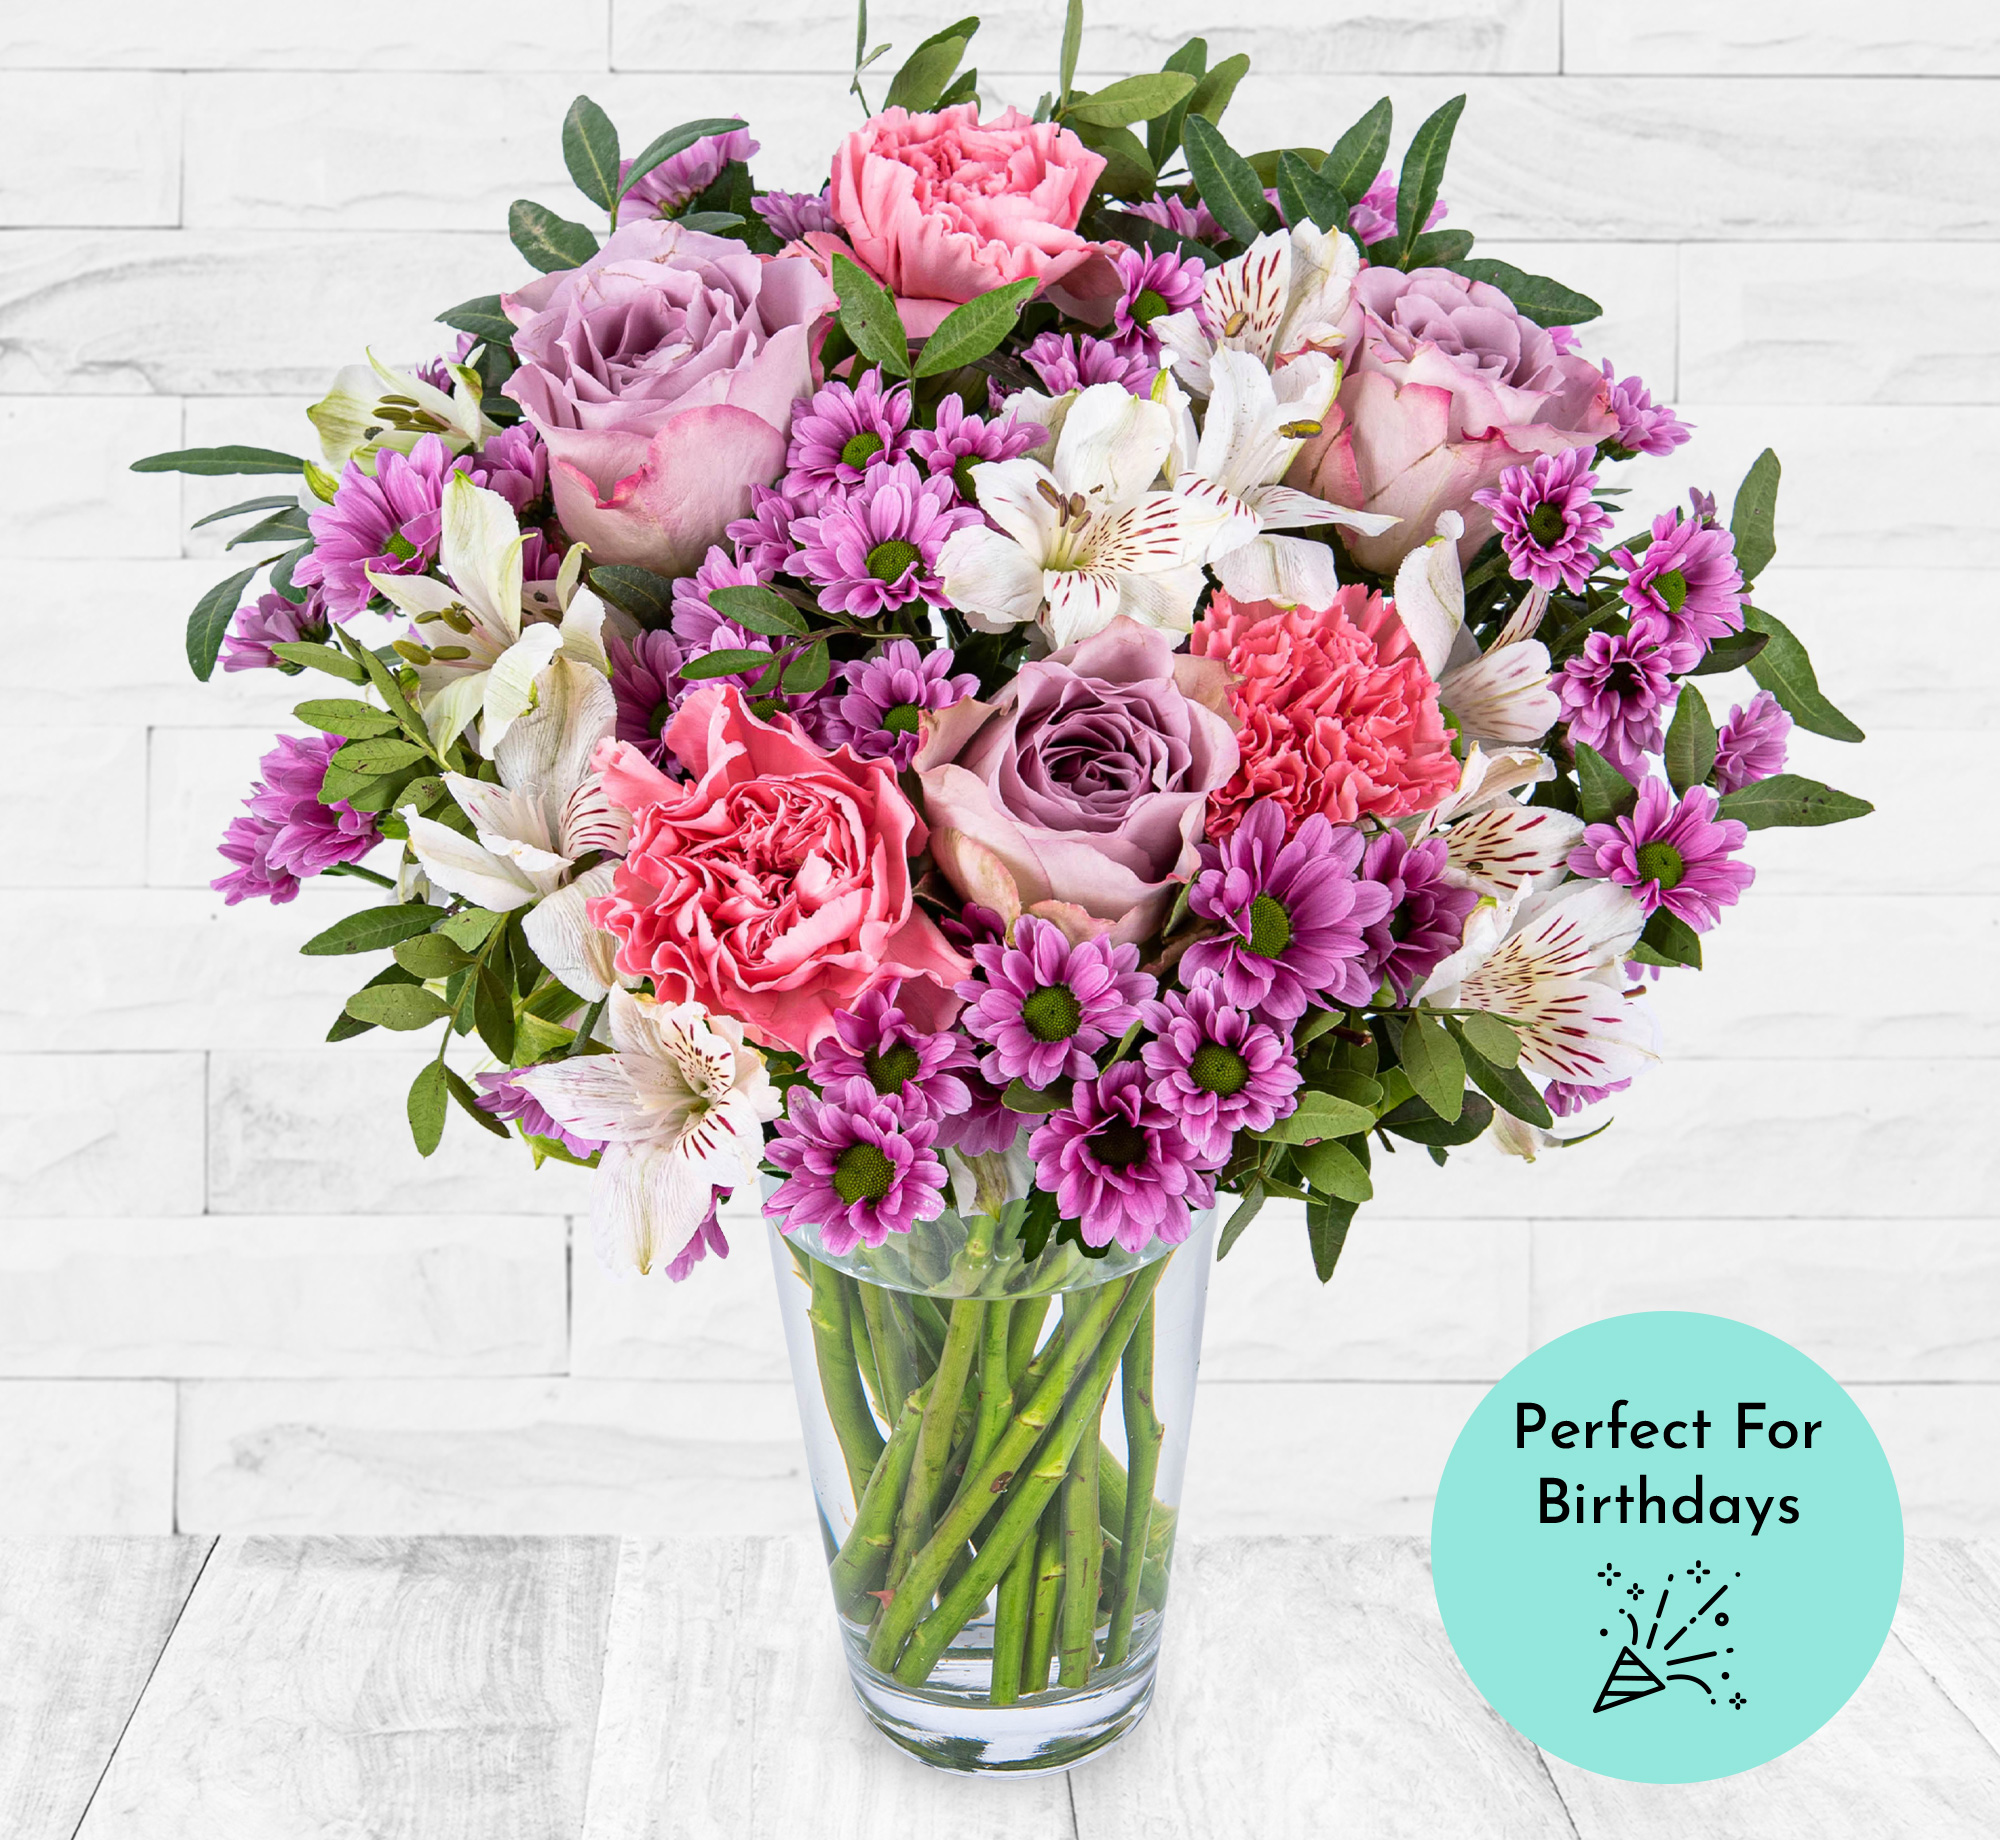 Pastel Pleasures  Free Delivery - Roses  Peruvian LiliesandCarnations  Birthday Flowers  Flower Delivery